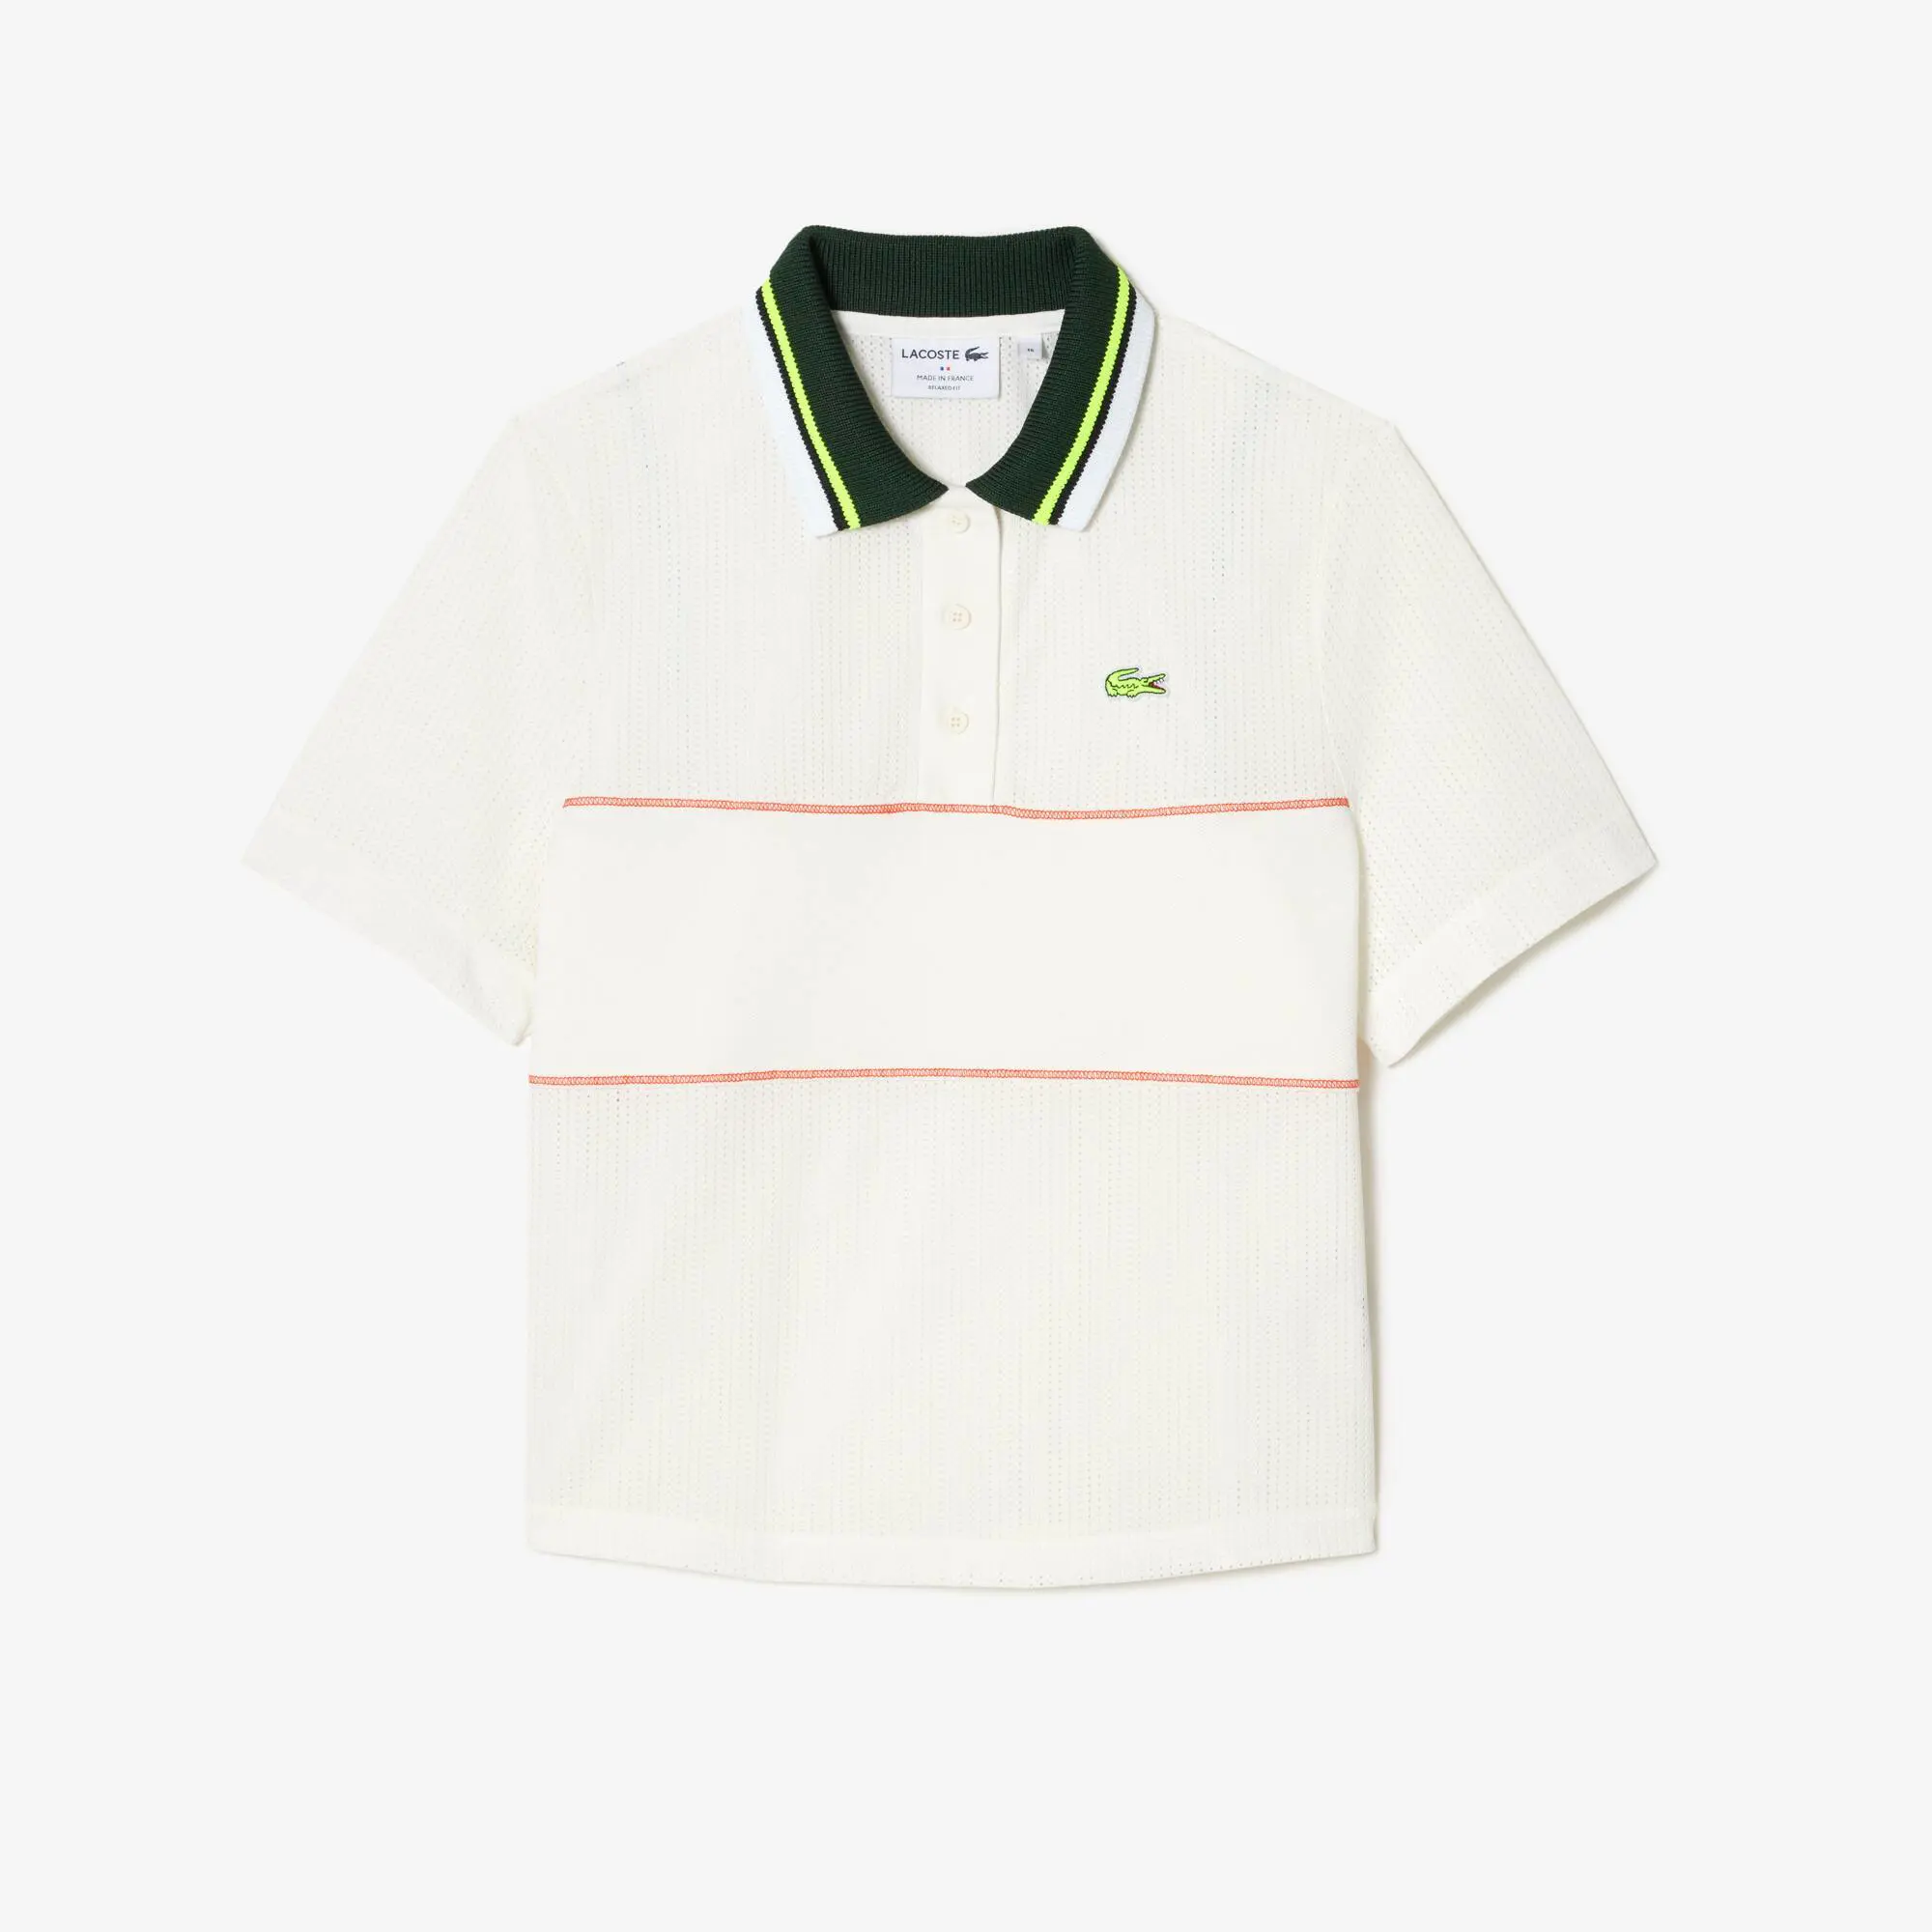 Lacoste Women’s Organic Cotton French Made Loose Cut Polo. 2